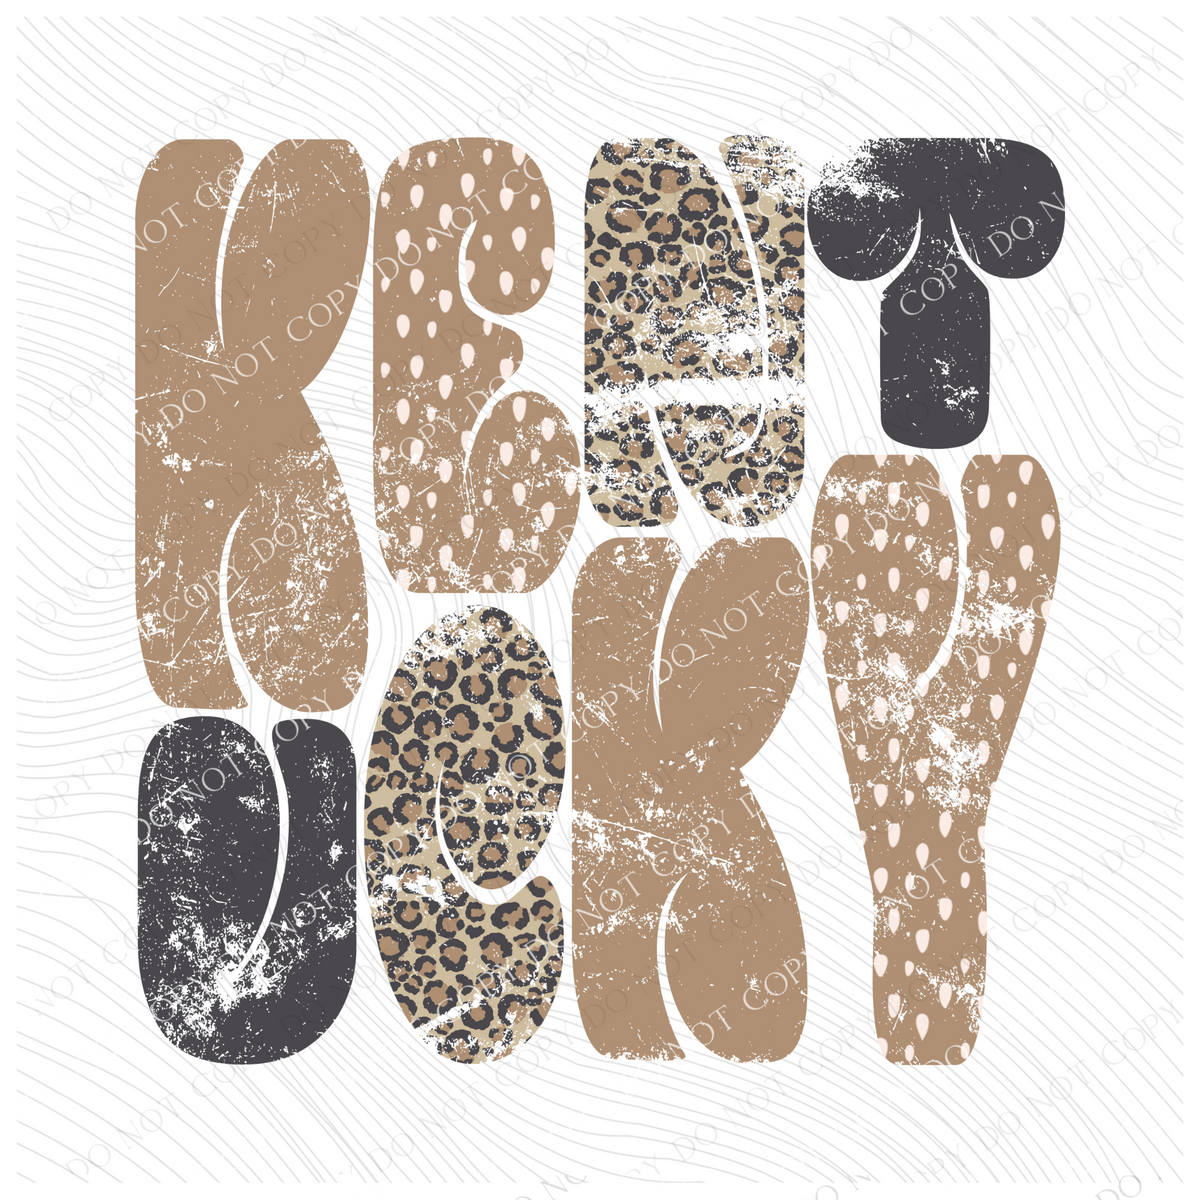 Kentucky Chubby Retro Distressed Leopard print in tones of Tans & Faded Black Digital Design, PNG